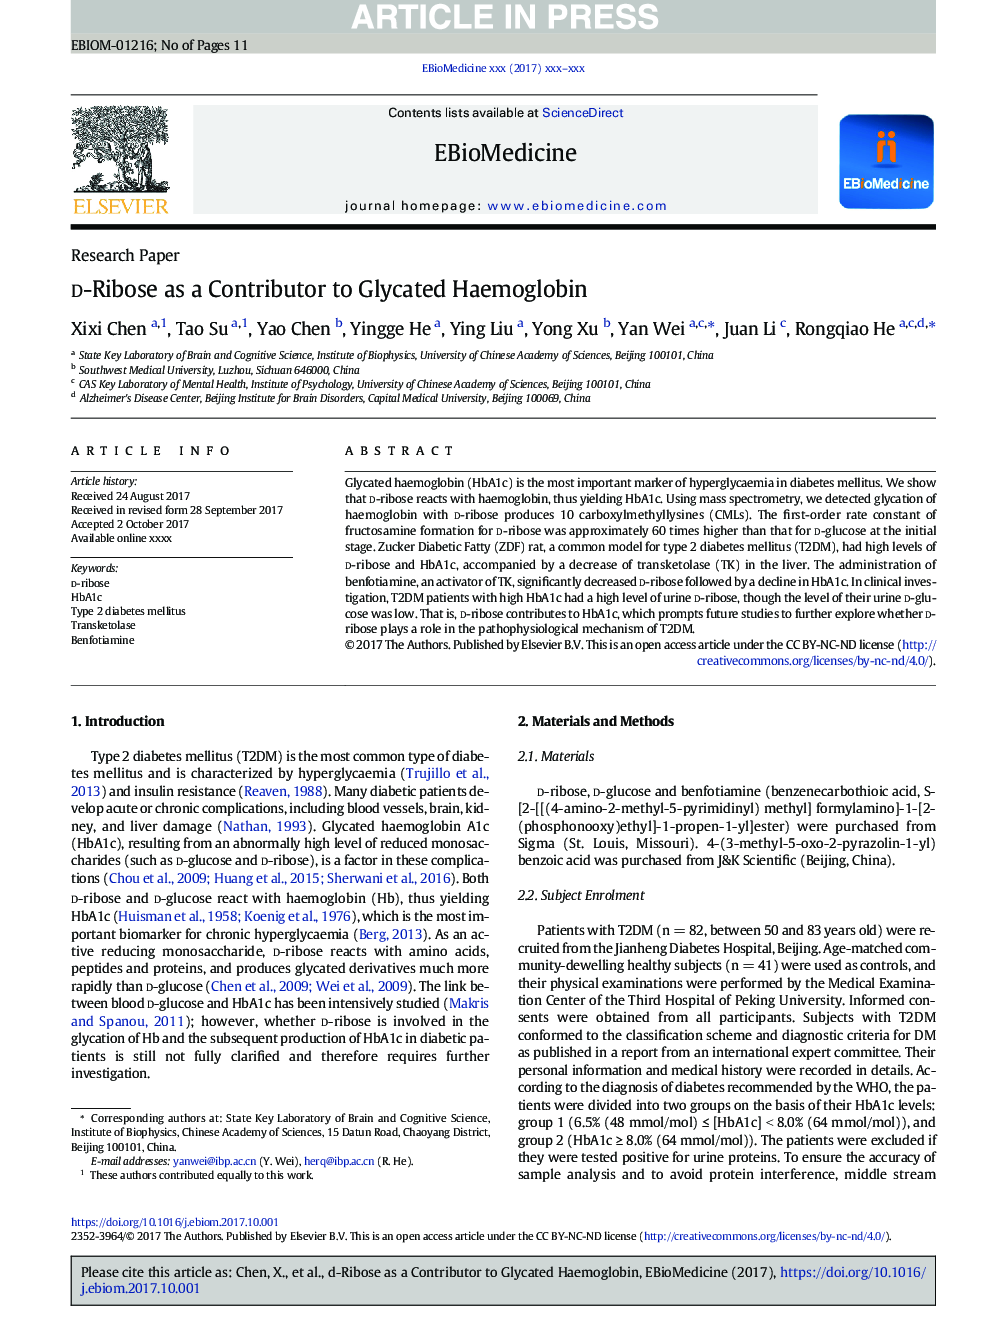 d-Ribose as a Contributor to Glycated Haemoglobin